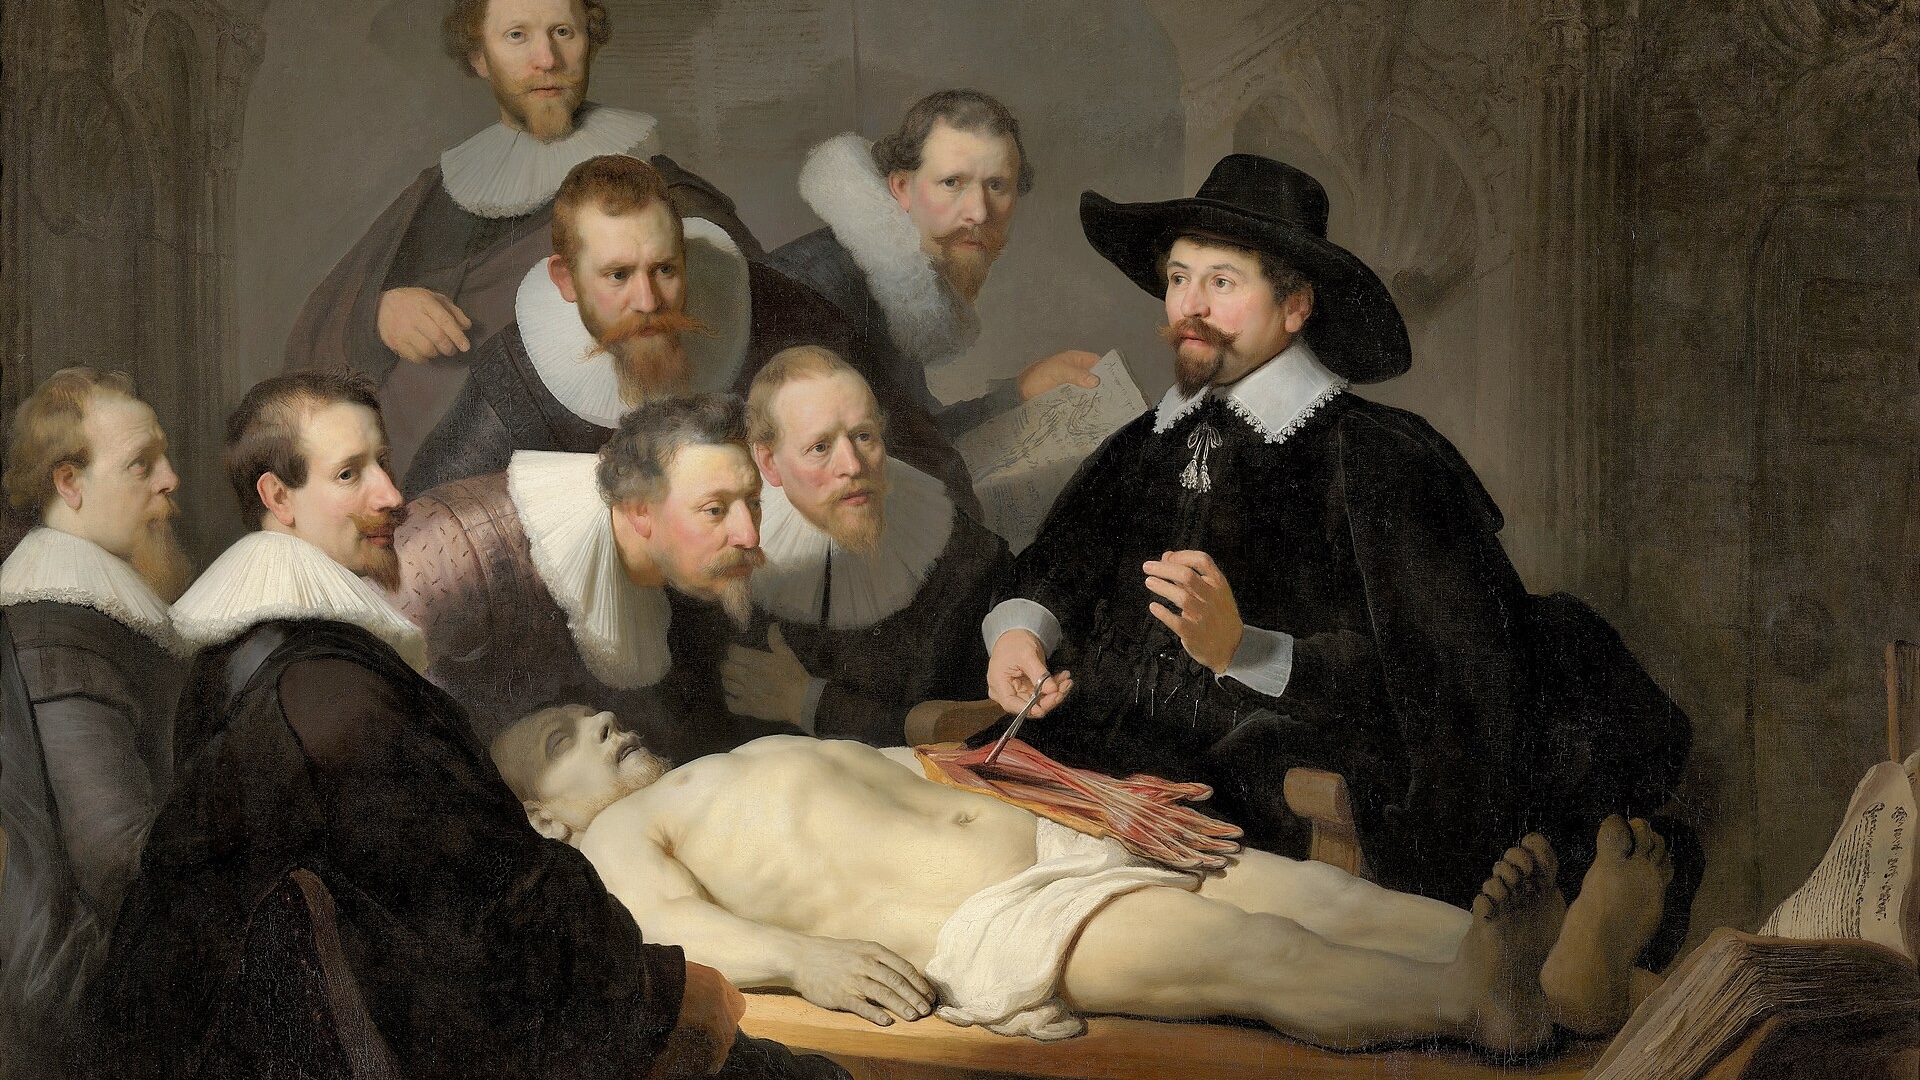 A painting of a group of men examining a cadaver